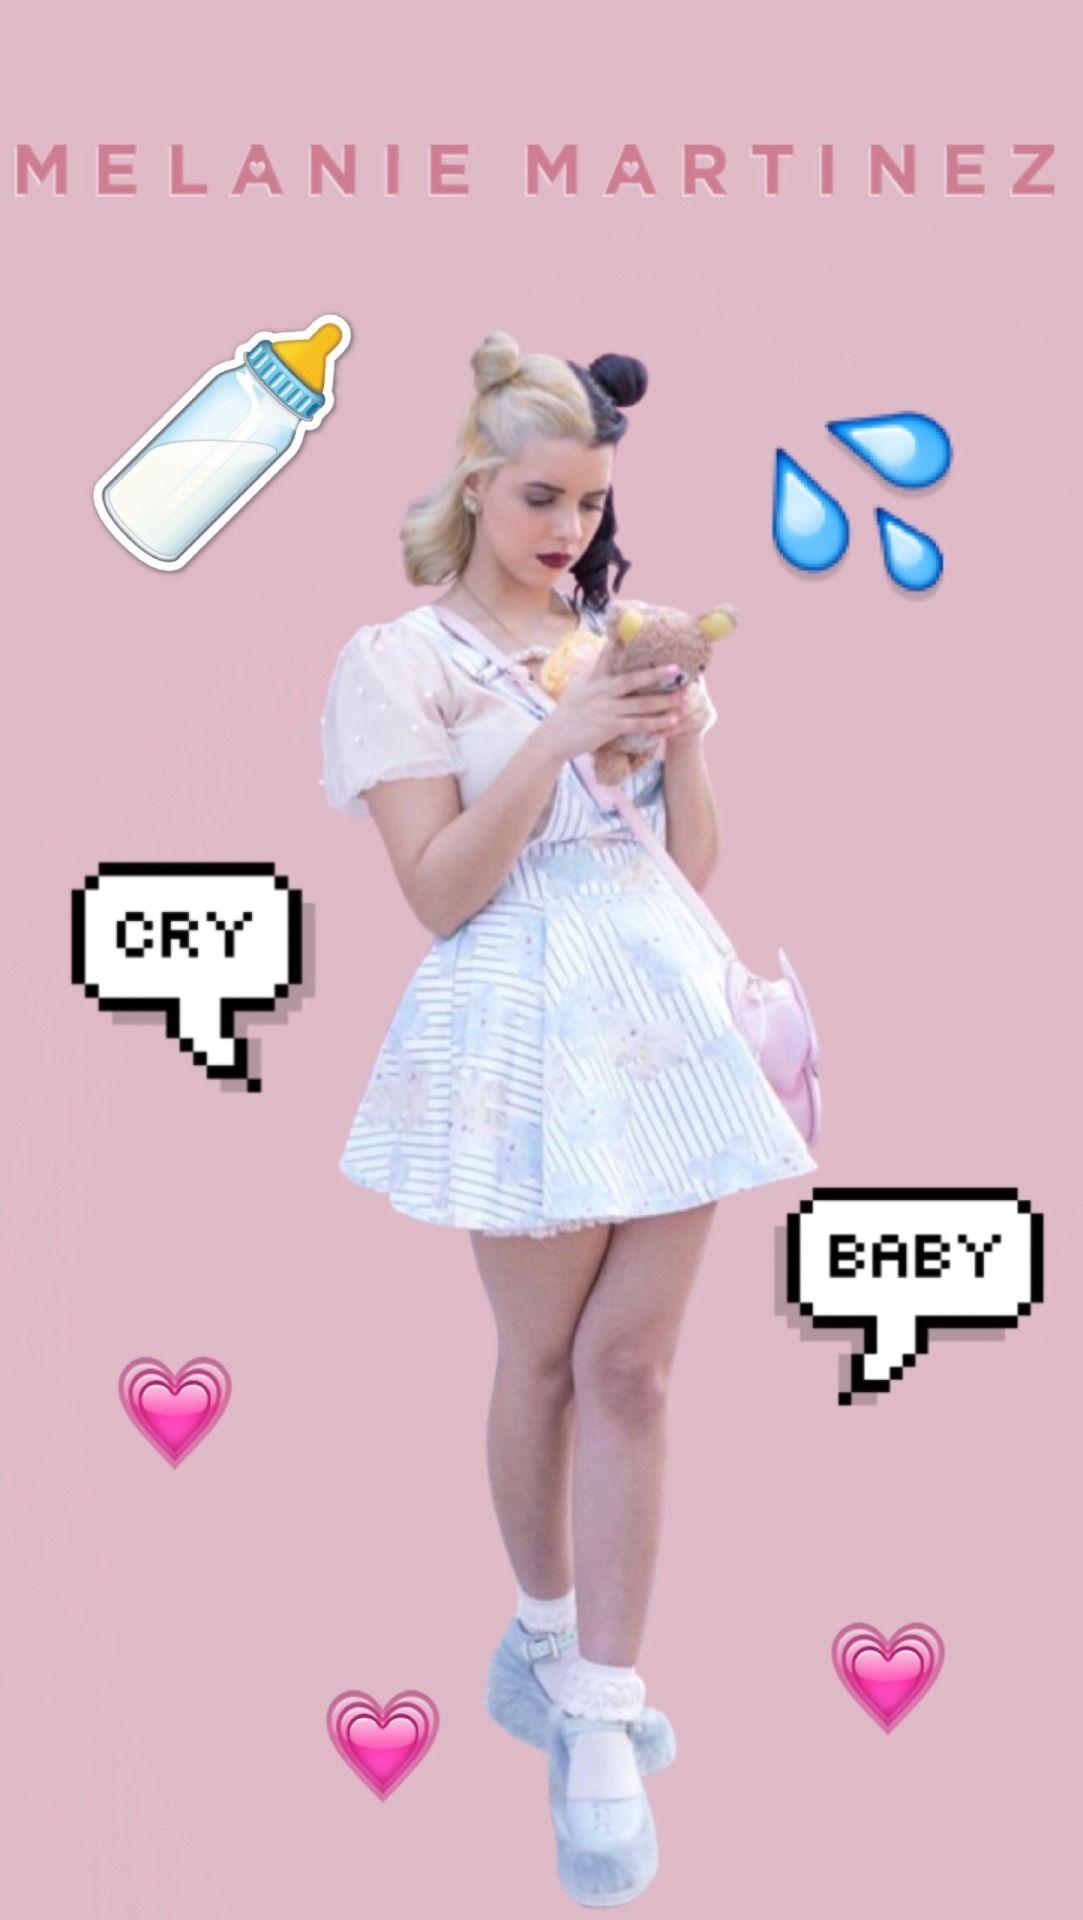 Cry baby мелани мартинес. Мелани Crybaby. Край Беби Мелани Мартинес. Crybaby Melanie Martinez. Vtkfyb fvтинез Cry bby.